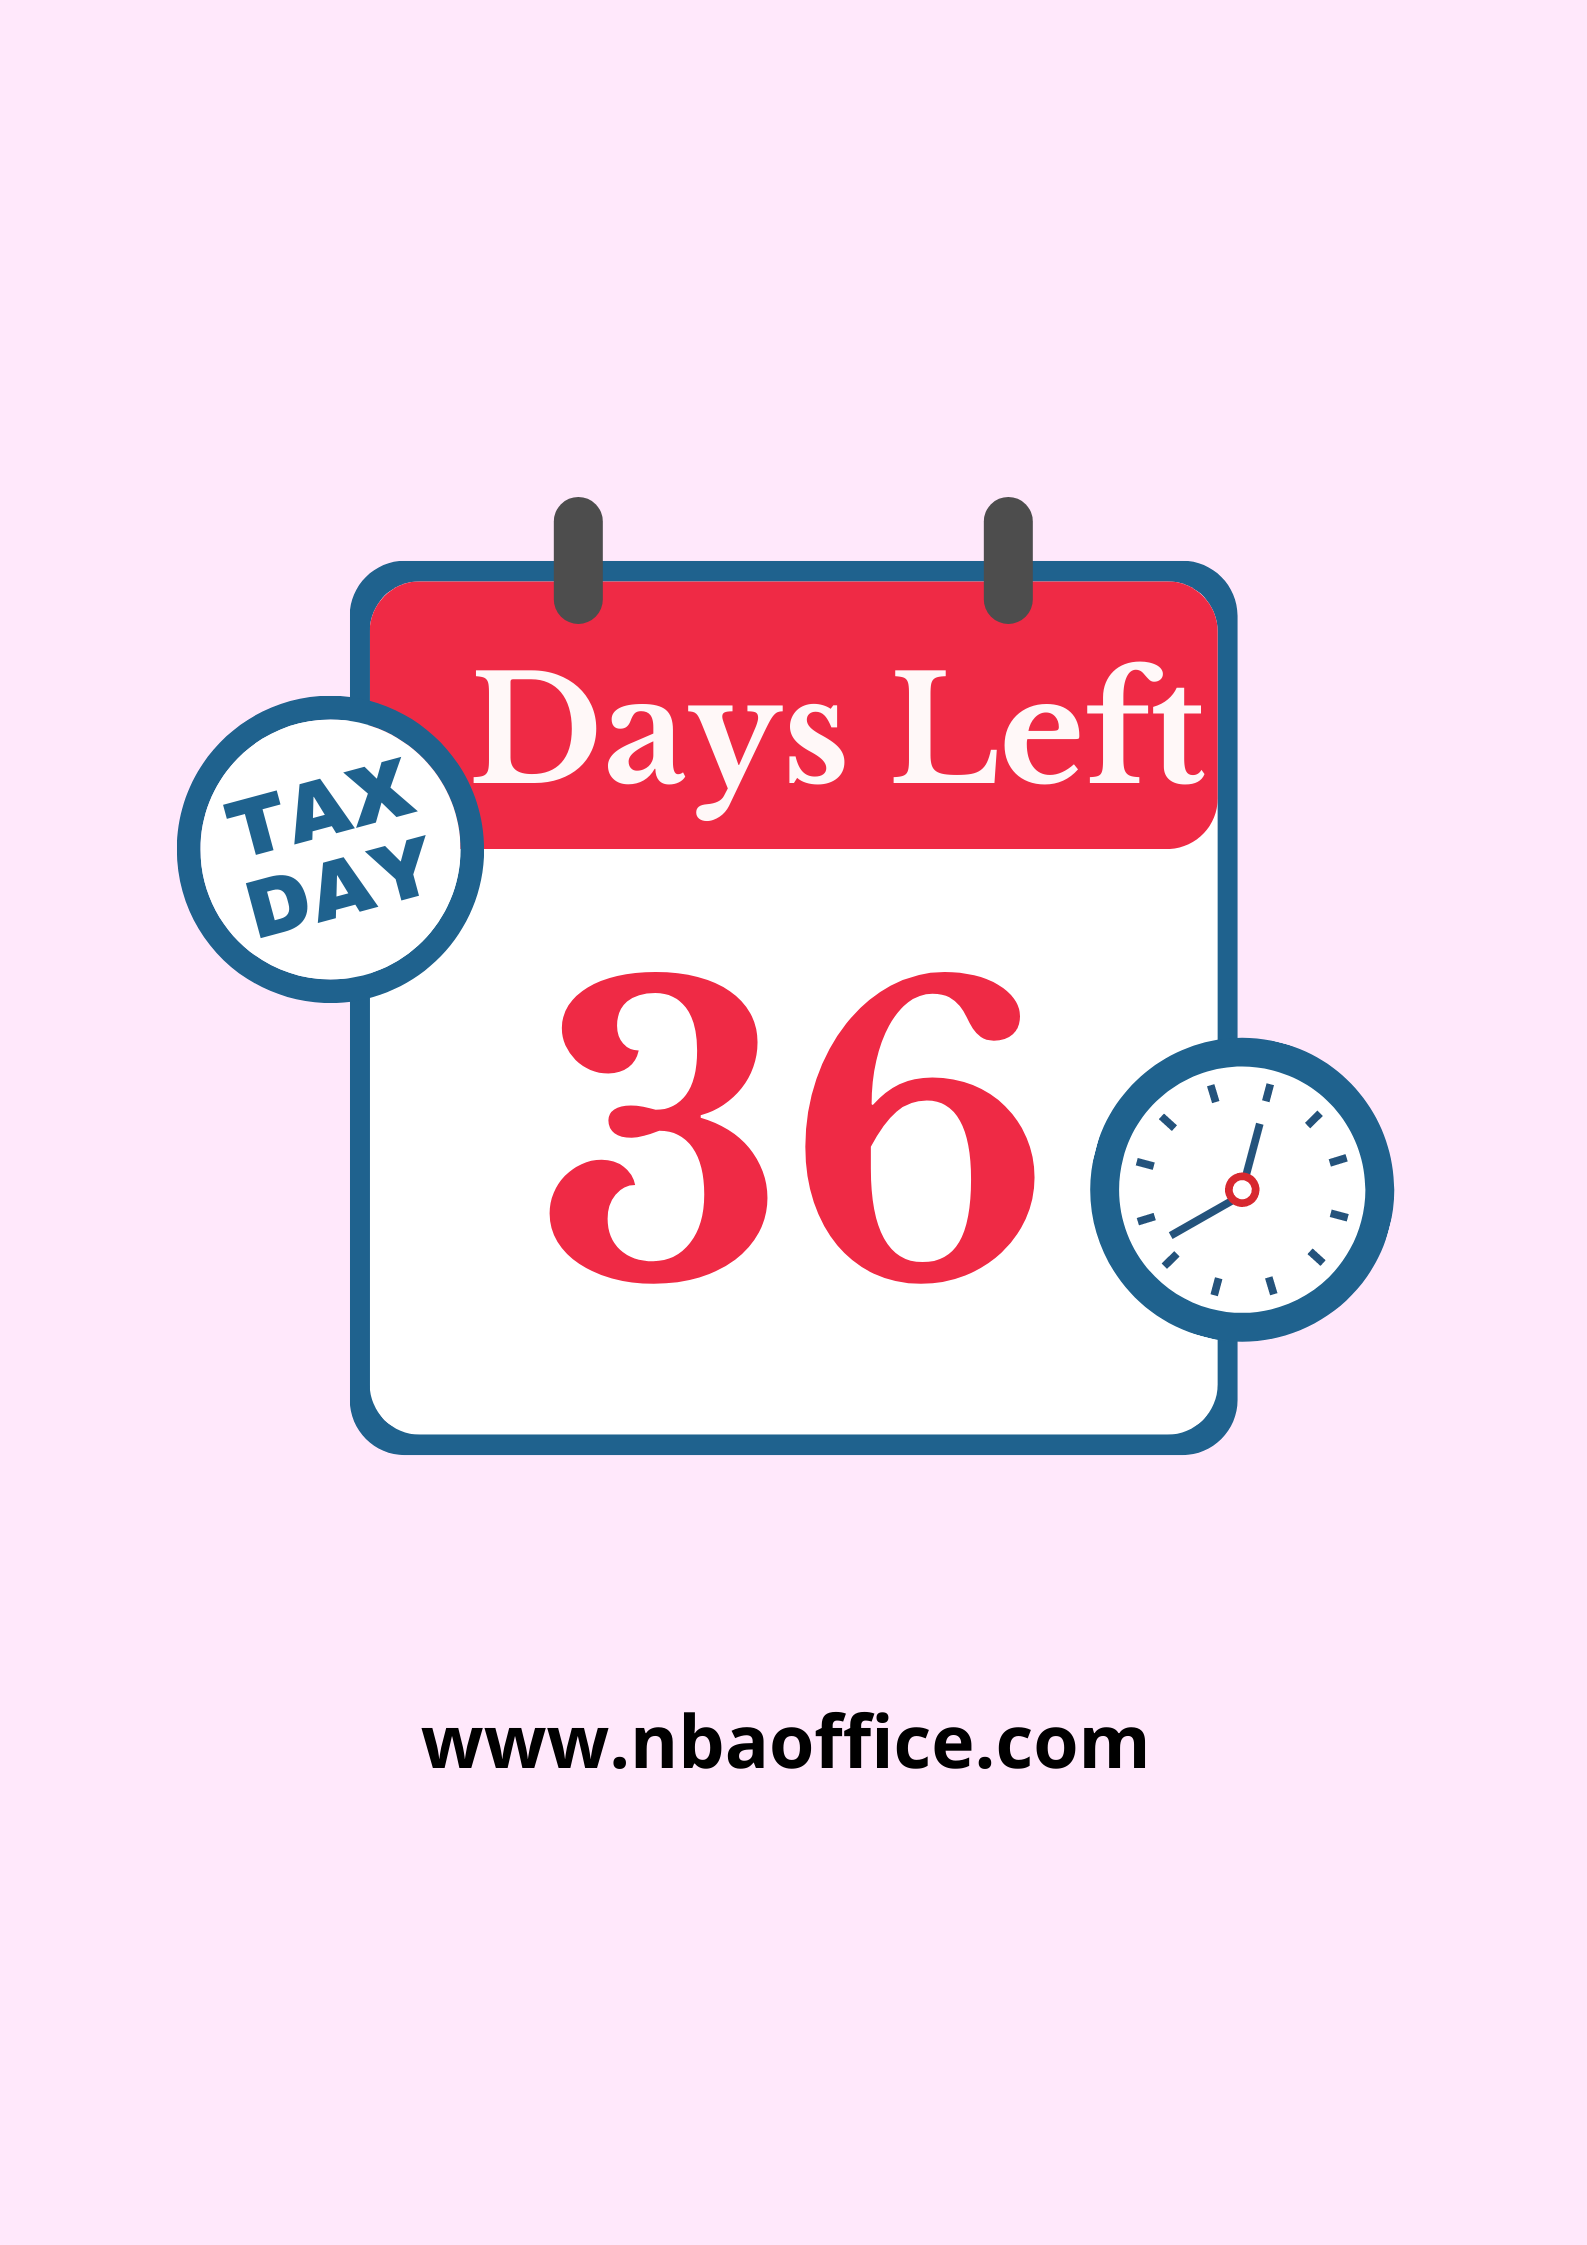 File Your ITR Before the July 31st Deadline: Only 36 Days Left